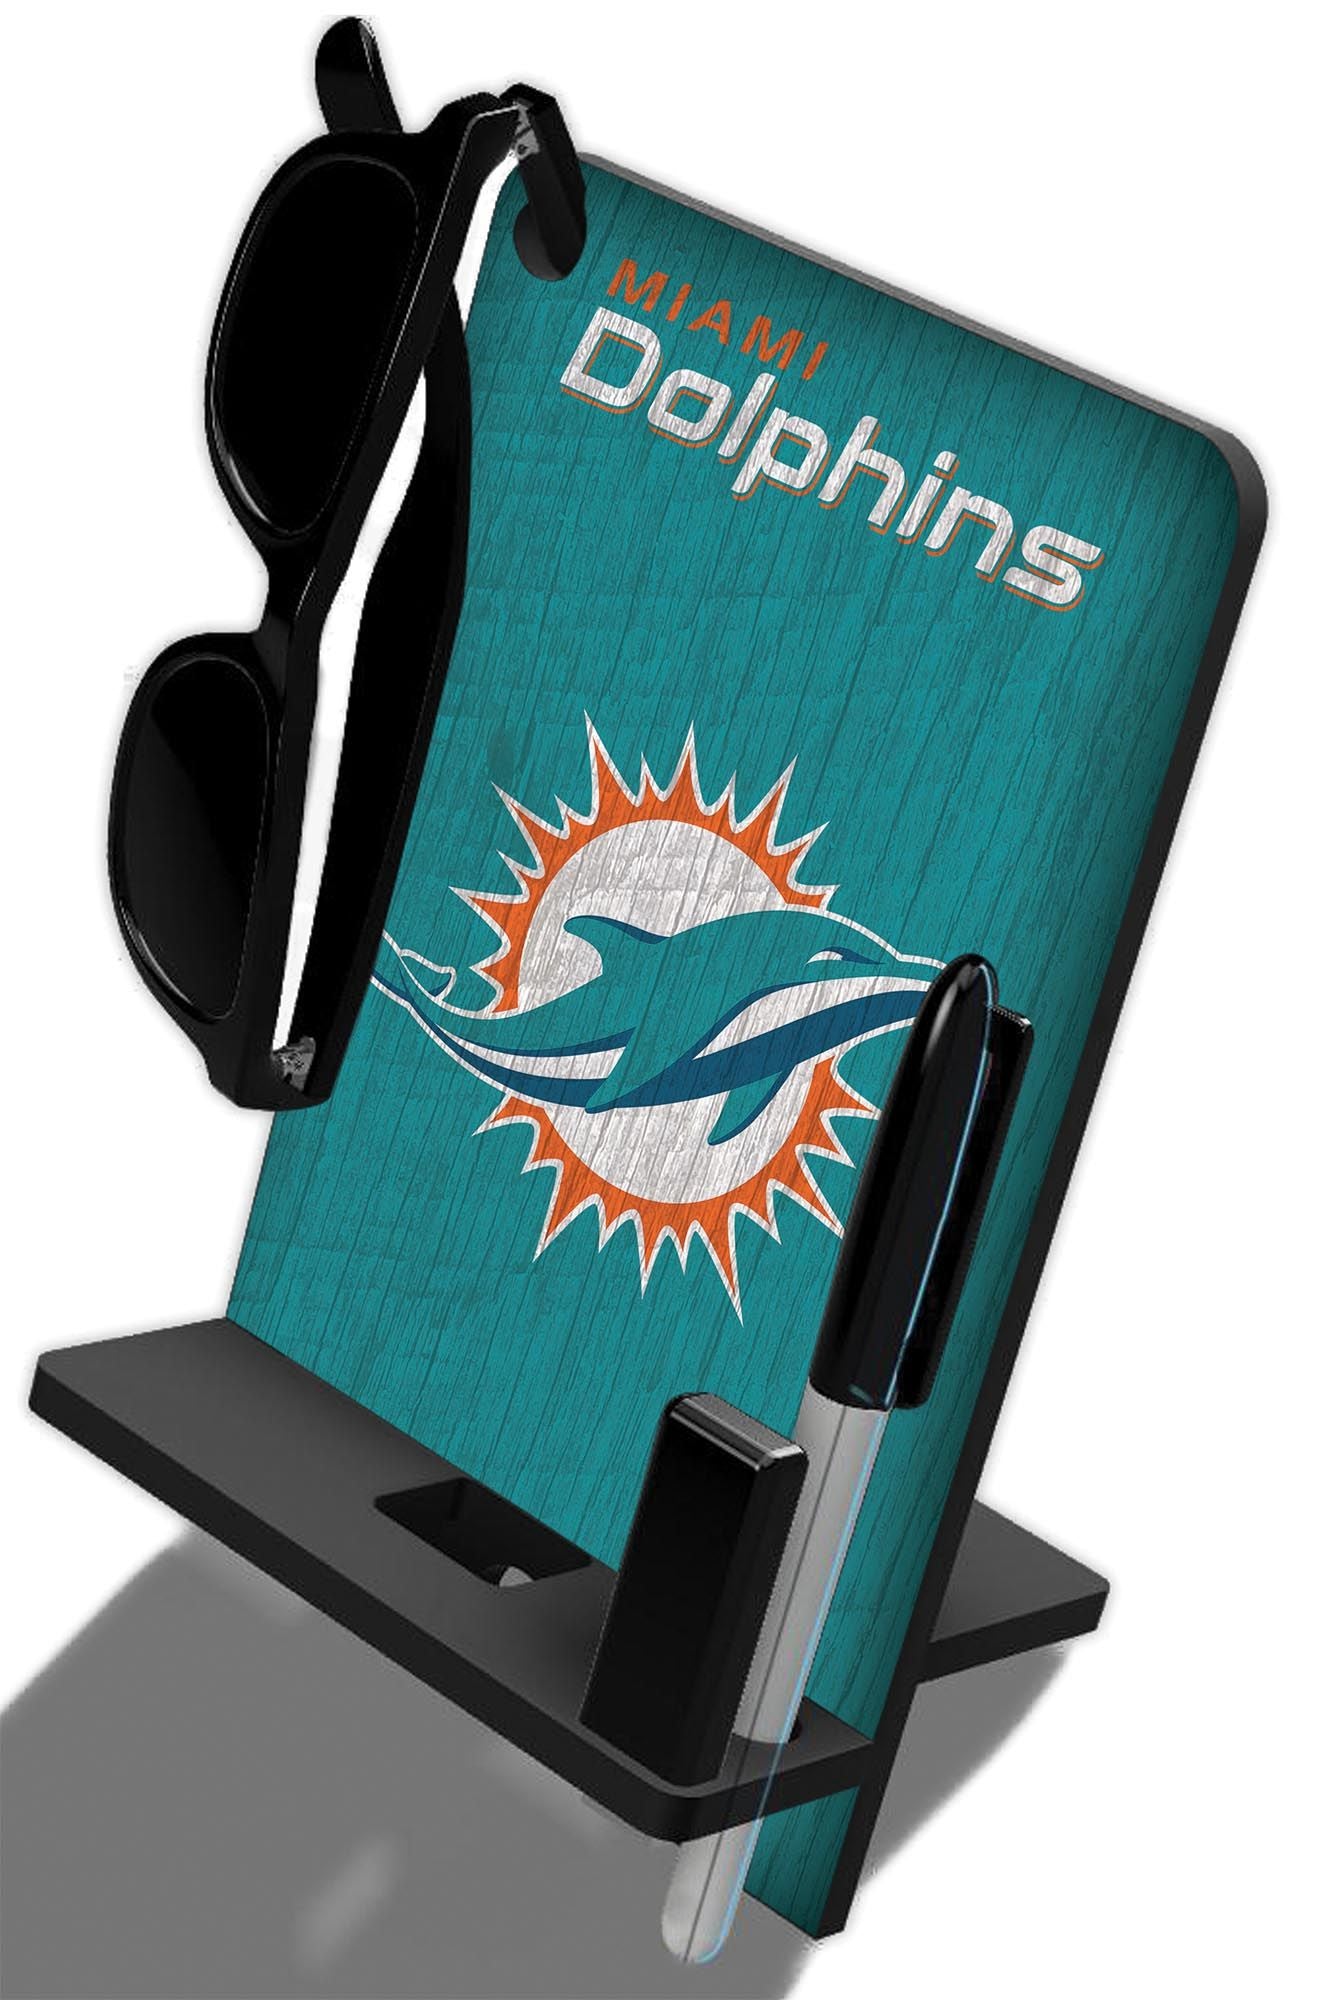 Miami Dolphins 4-in-1 Desktop Phone Stand by Fan Creations